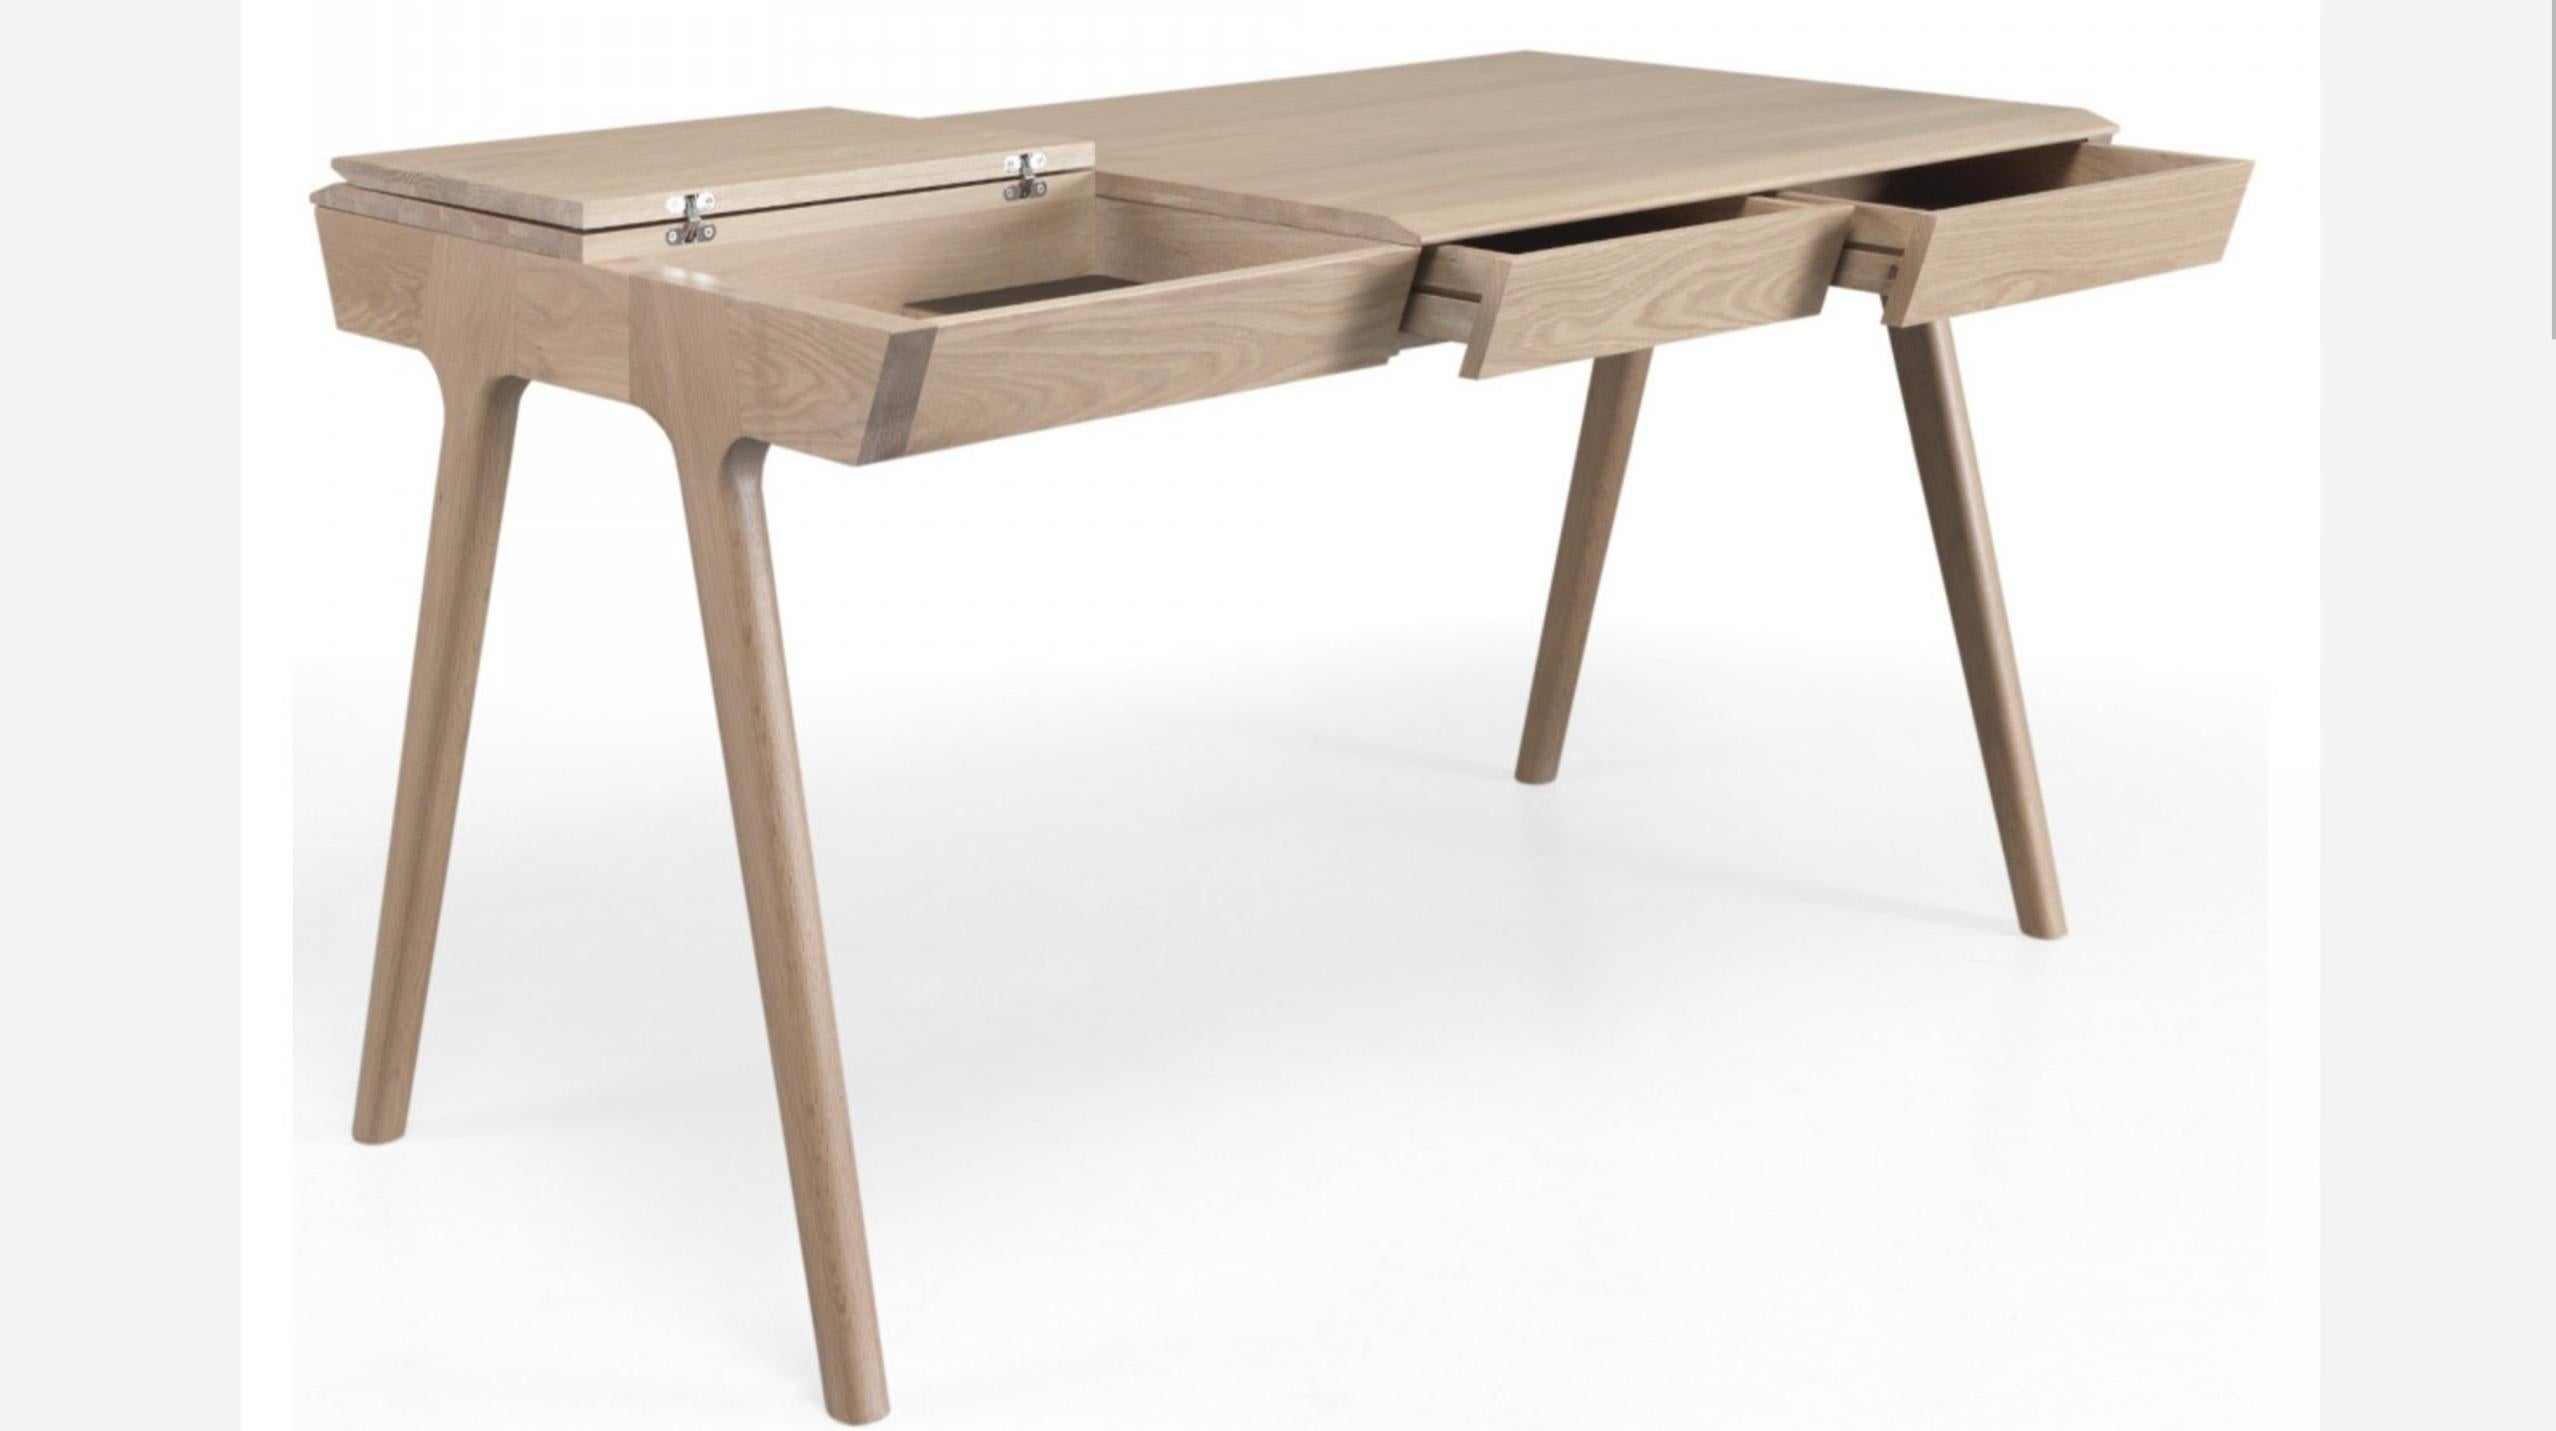 Beautifull handmade Nordic style compact desk made of solid oak wood offering a real storage solution with three drawers, one secret compartment and two lidded sections. Minimalist, elegant and practical. High end quality. 
Complimentary free